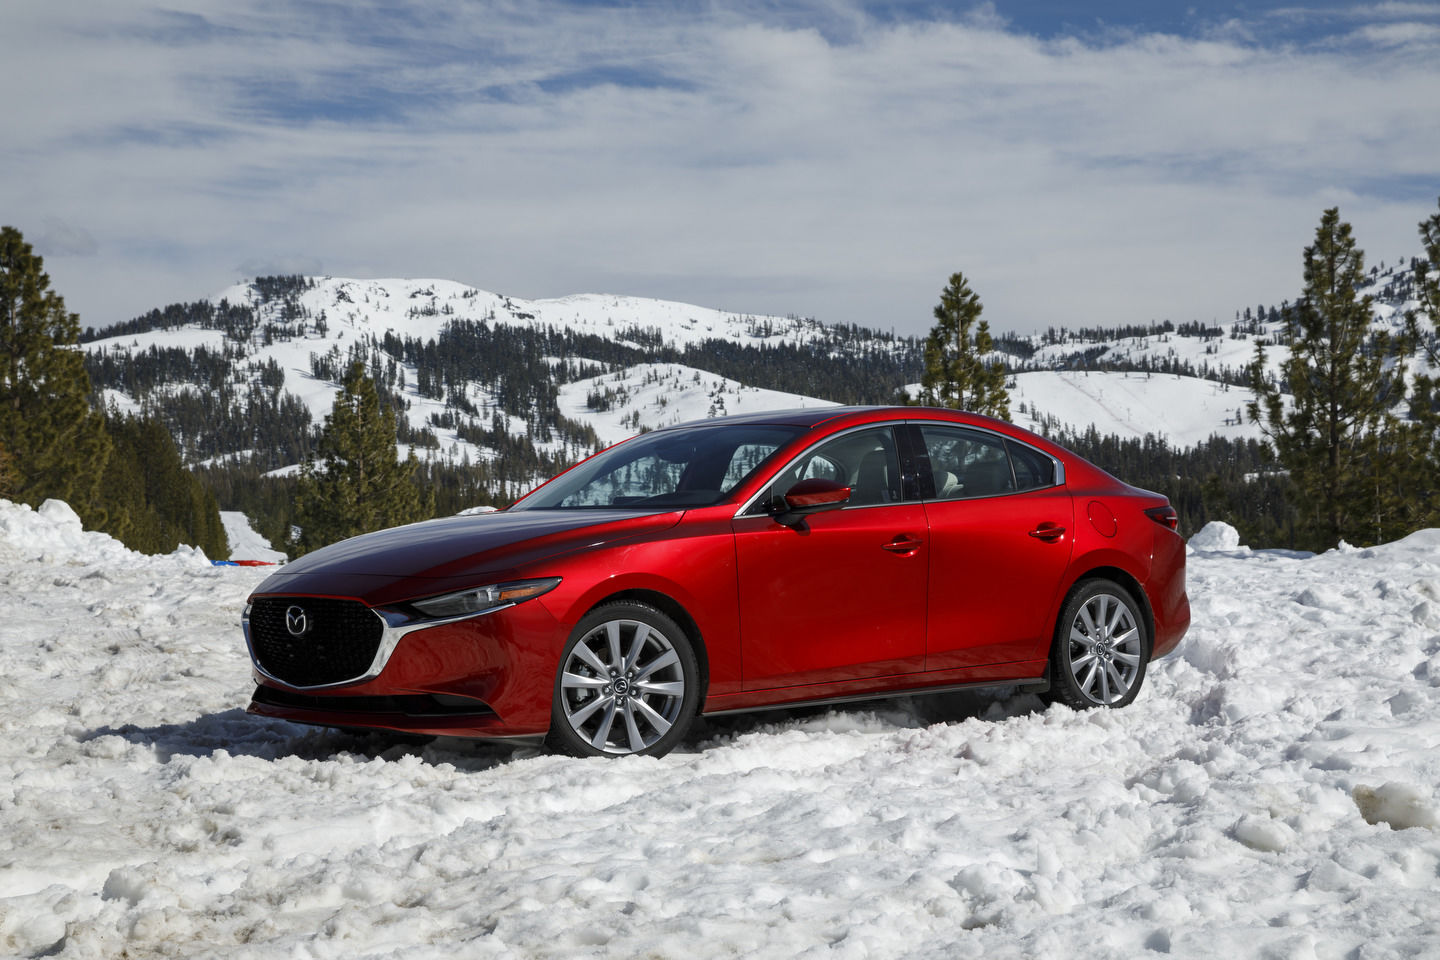 Protect Your Mazda This Winter: A Few Tips